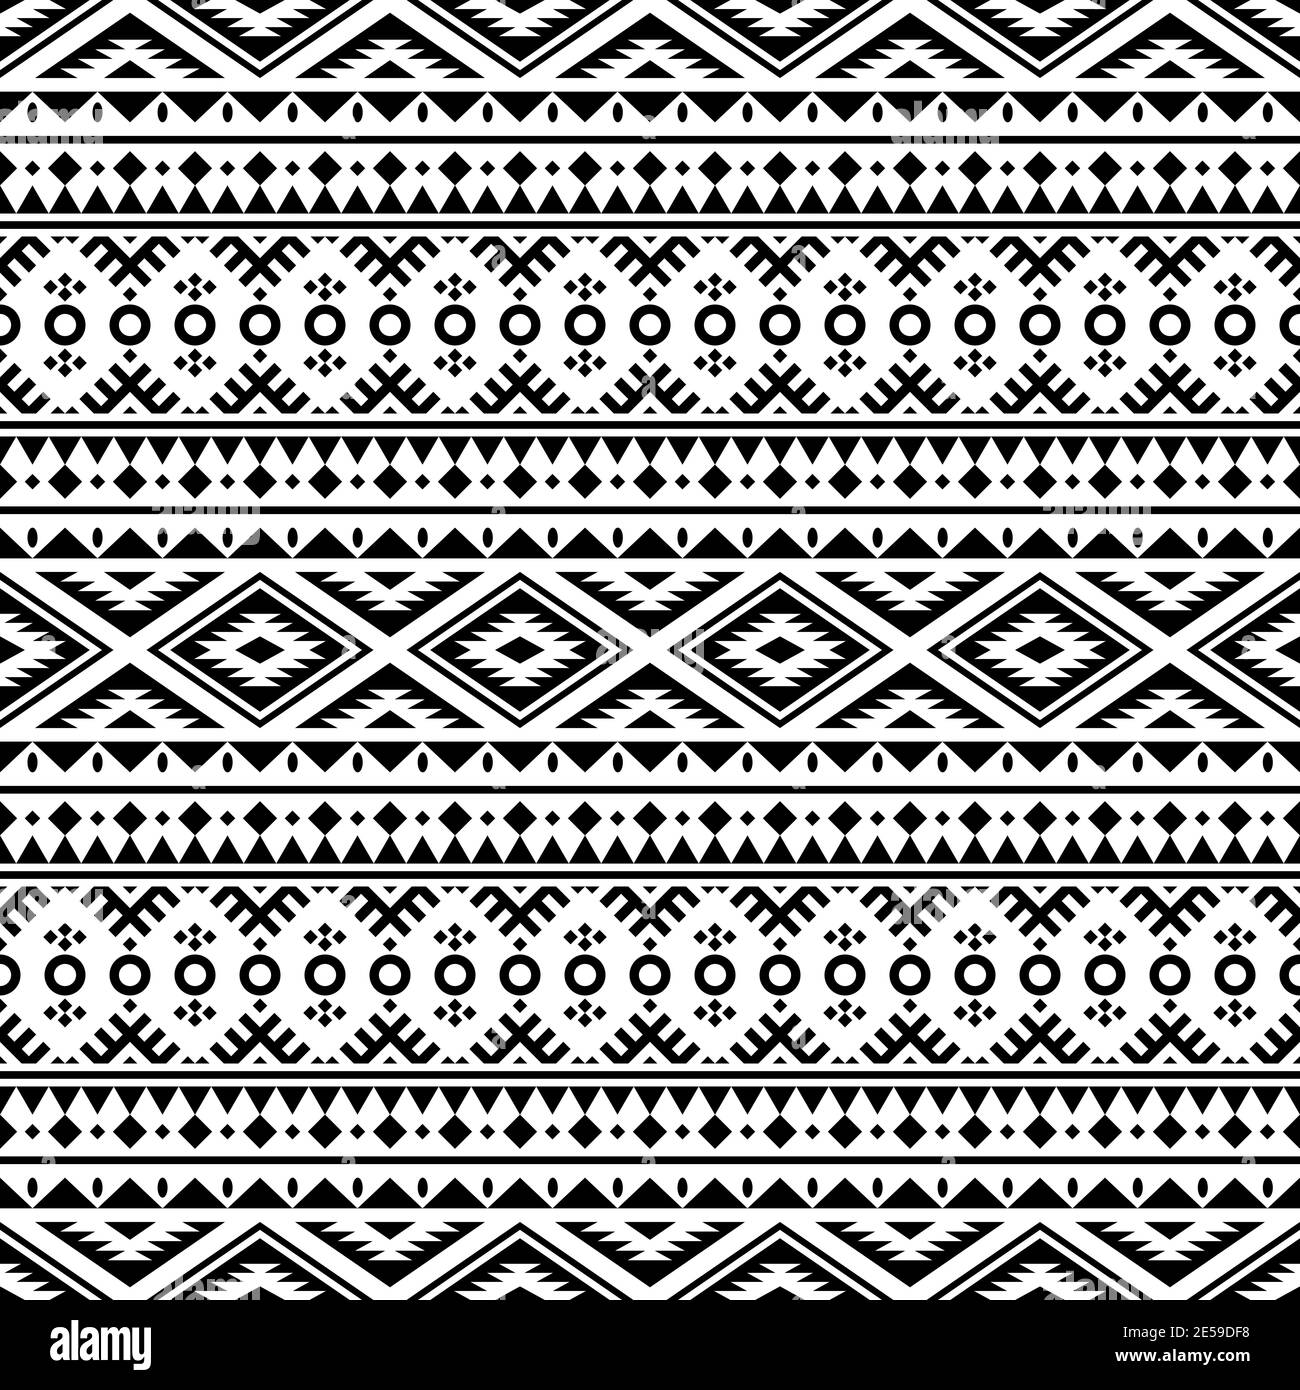 Aztec Seamless Ethnic Pattern Illustration vector with tribal design in ...